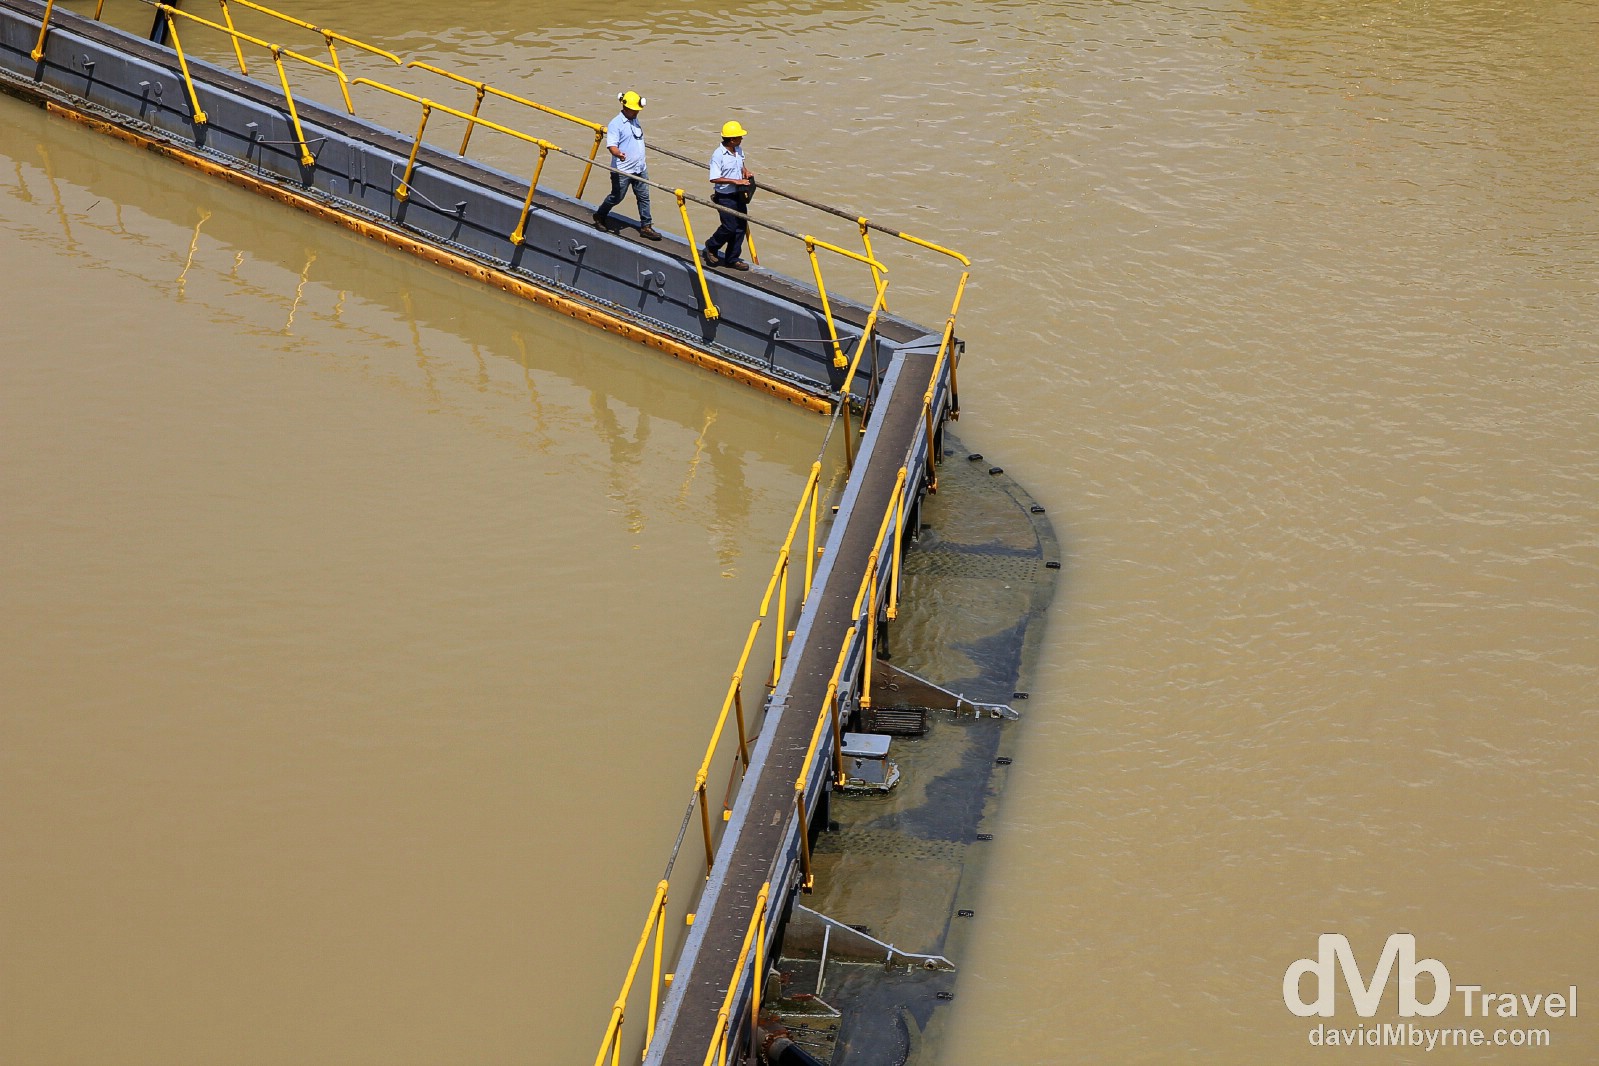 Workers crossing the Miraflores Locks of the Panama Canal, Panama. July 1st 2013.